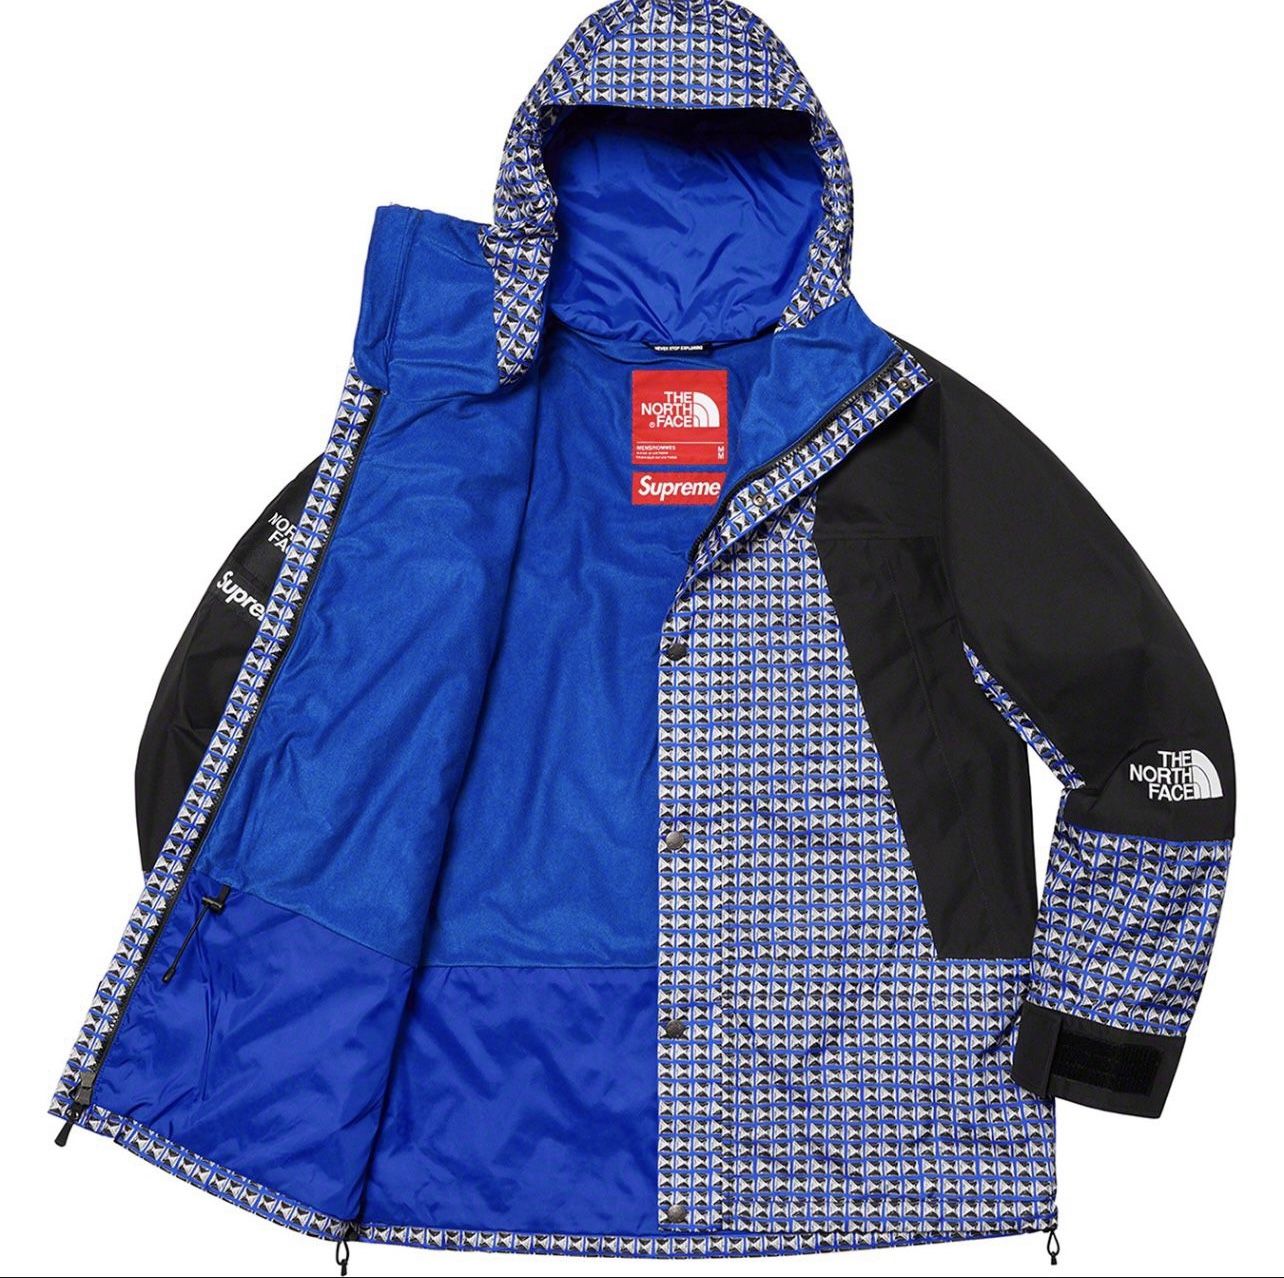 THE NORTH FACE X SUPREME JACKET Size XL